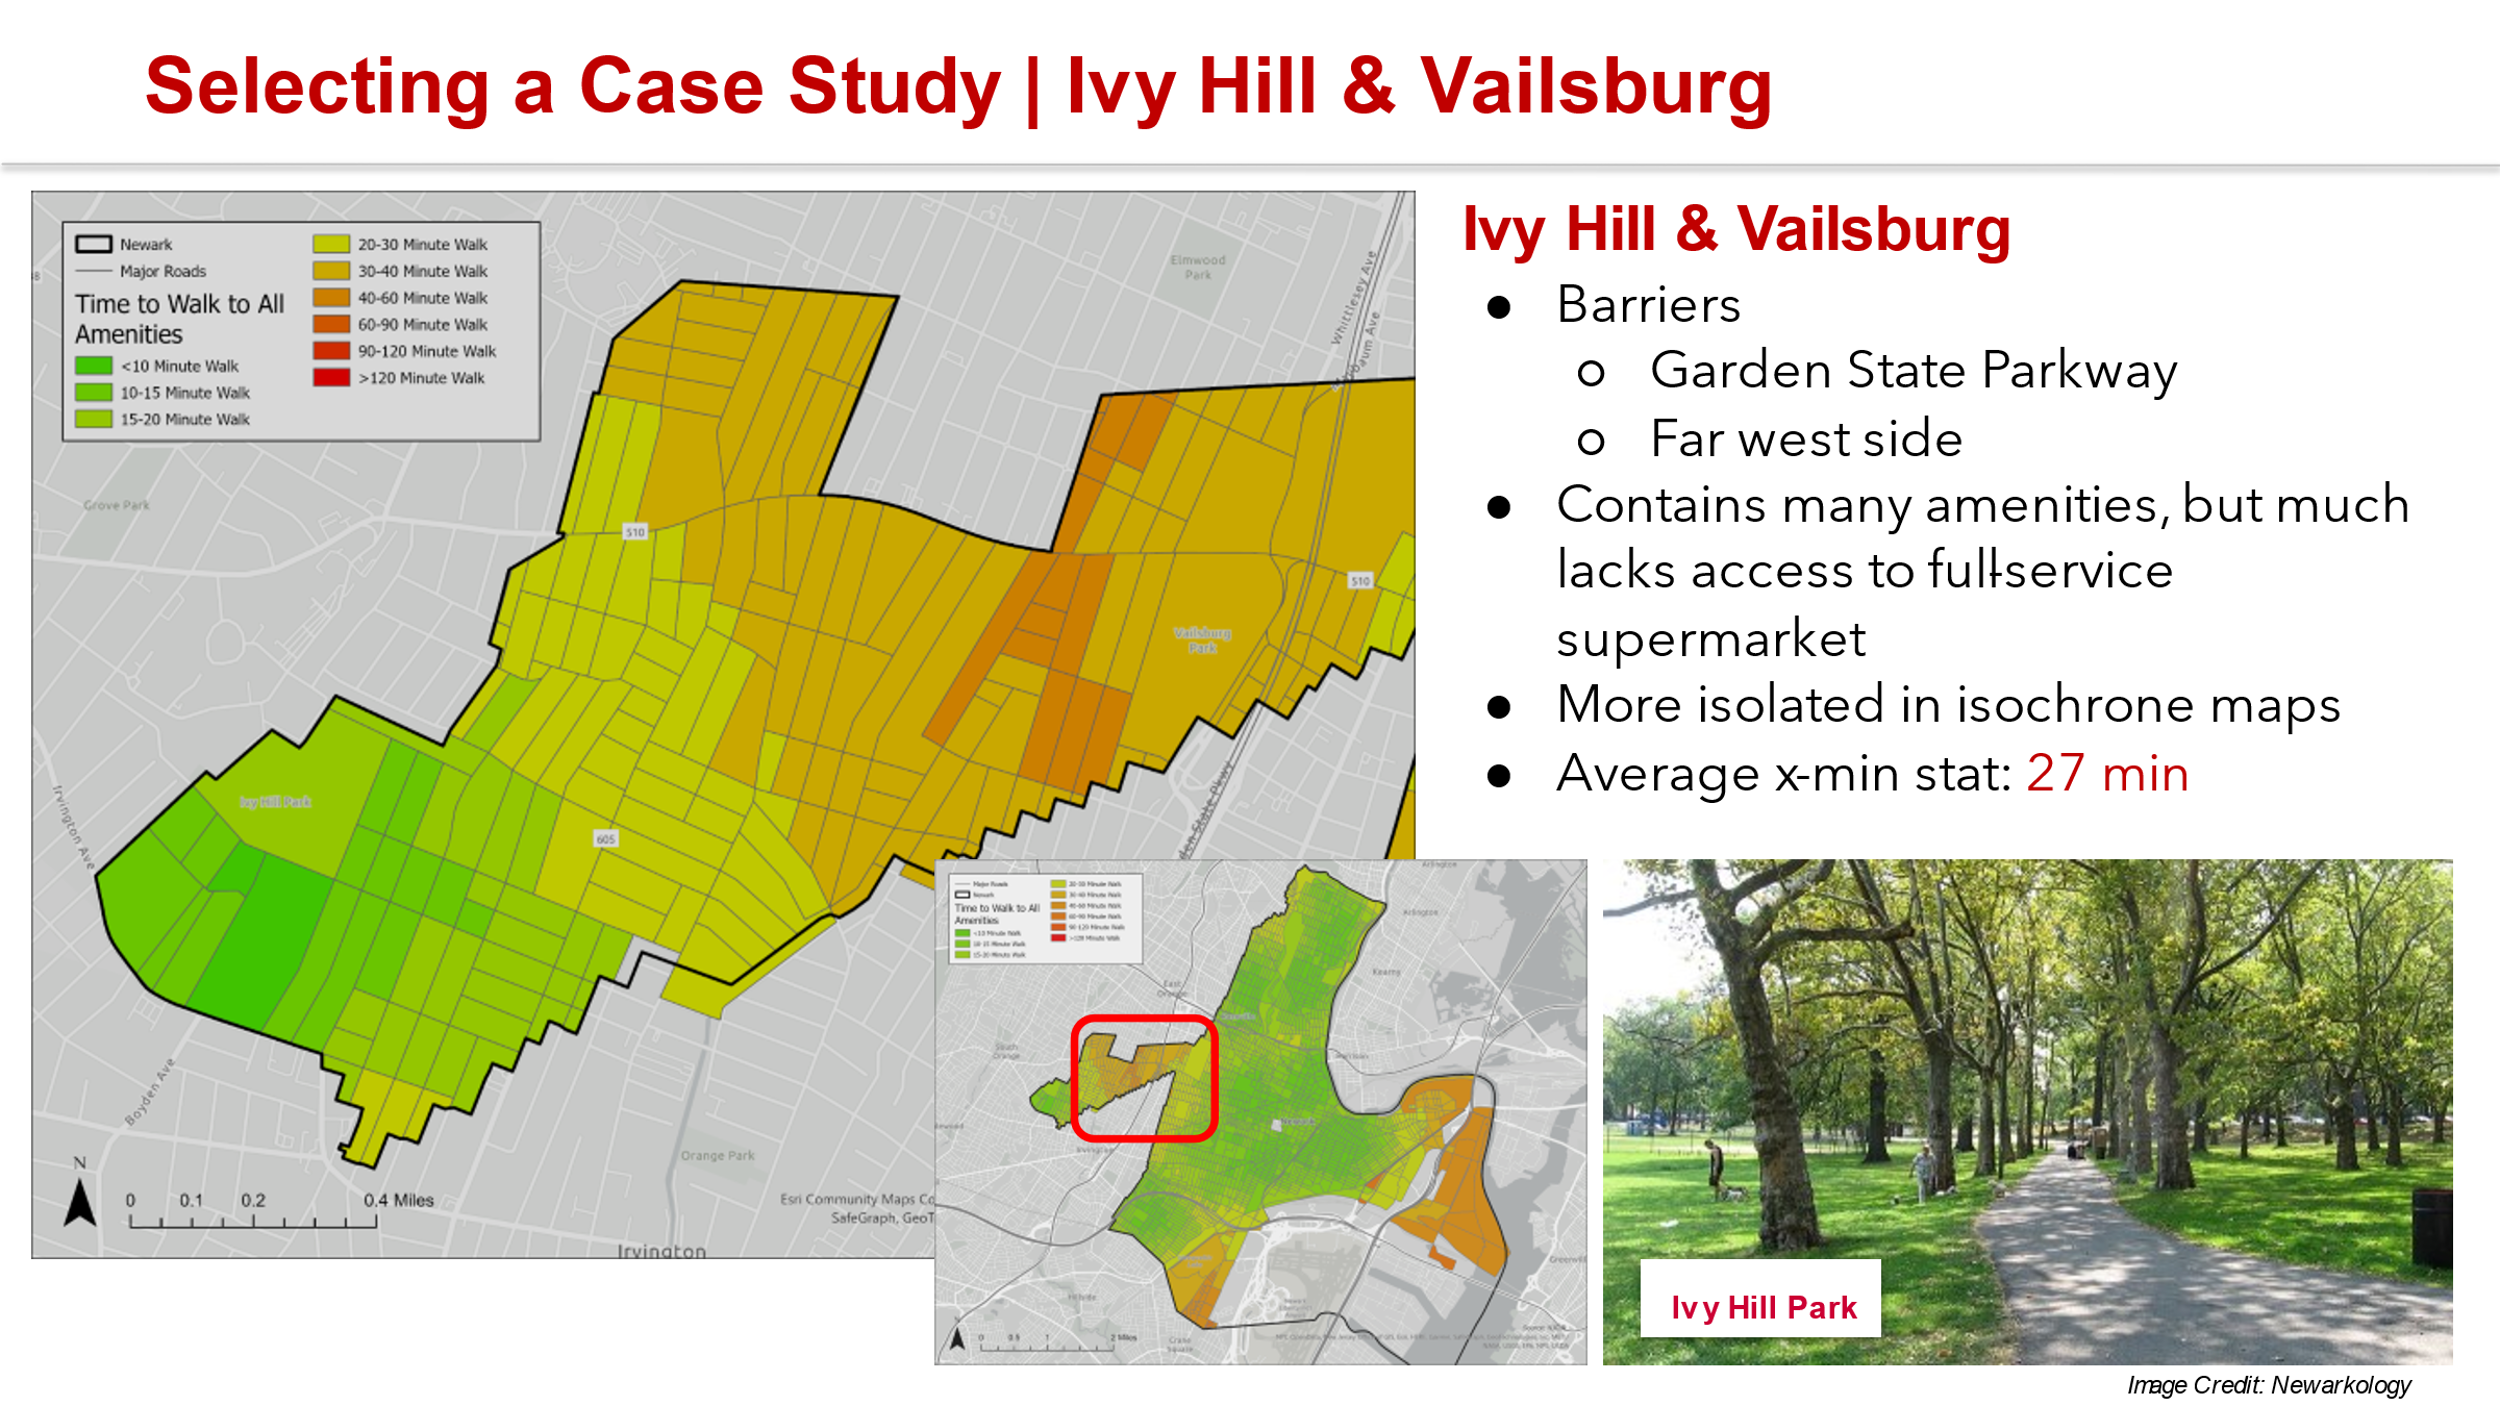 Figure 3: Overall access to amenities in the Ivy Hill/Vailsburg neighborhood in Newark, NJ